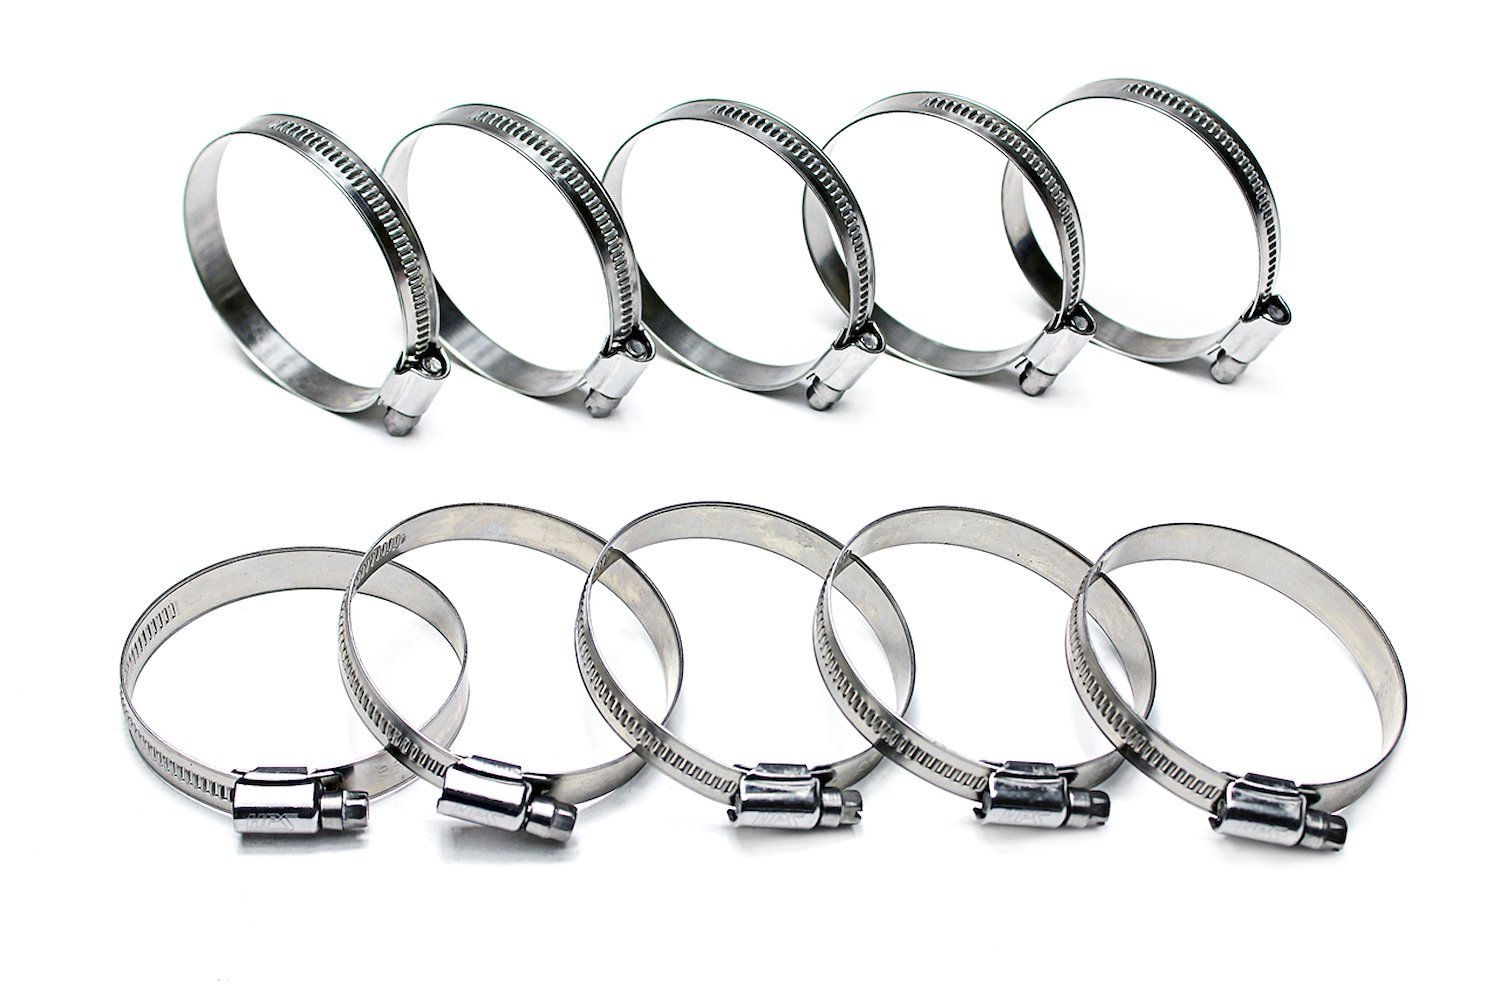 EMSC-30-45x10 Embossed Hose Clamp, Stainless Steel Embossed Hose Clamp, Size #20, Effective Range: 1-1/4 in.- 1-3/4 in., 10Pc